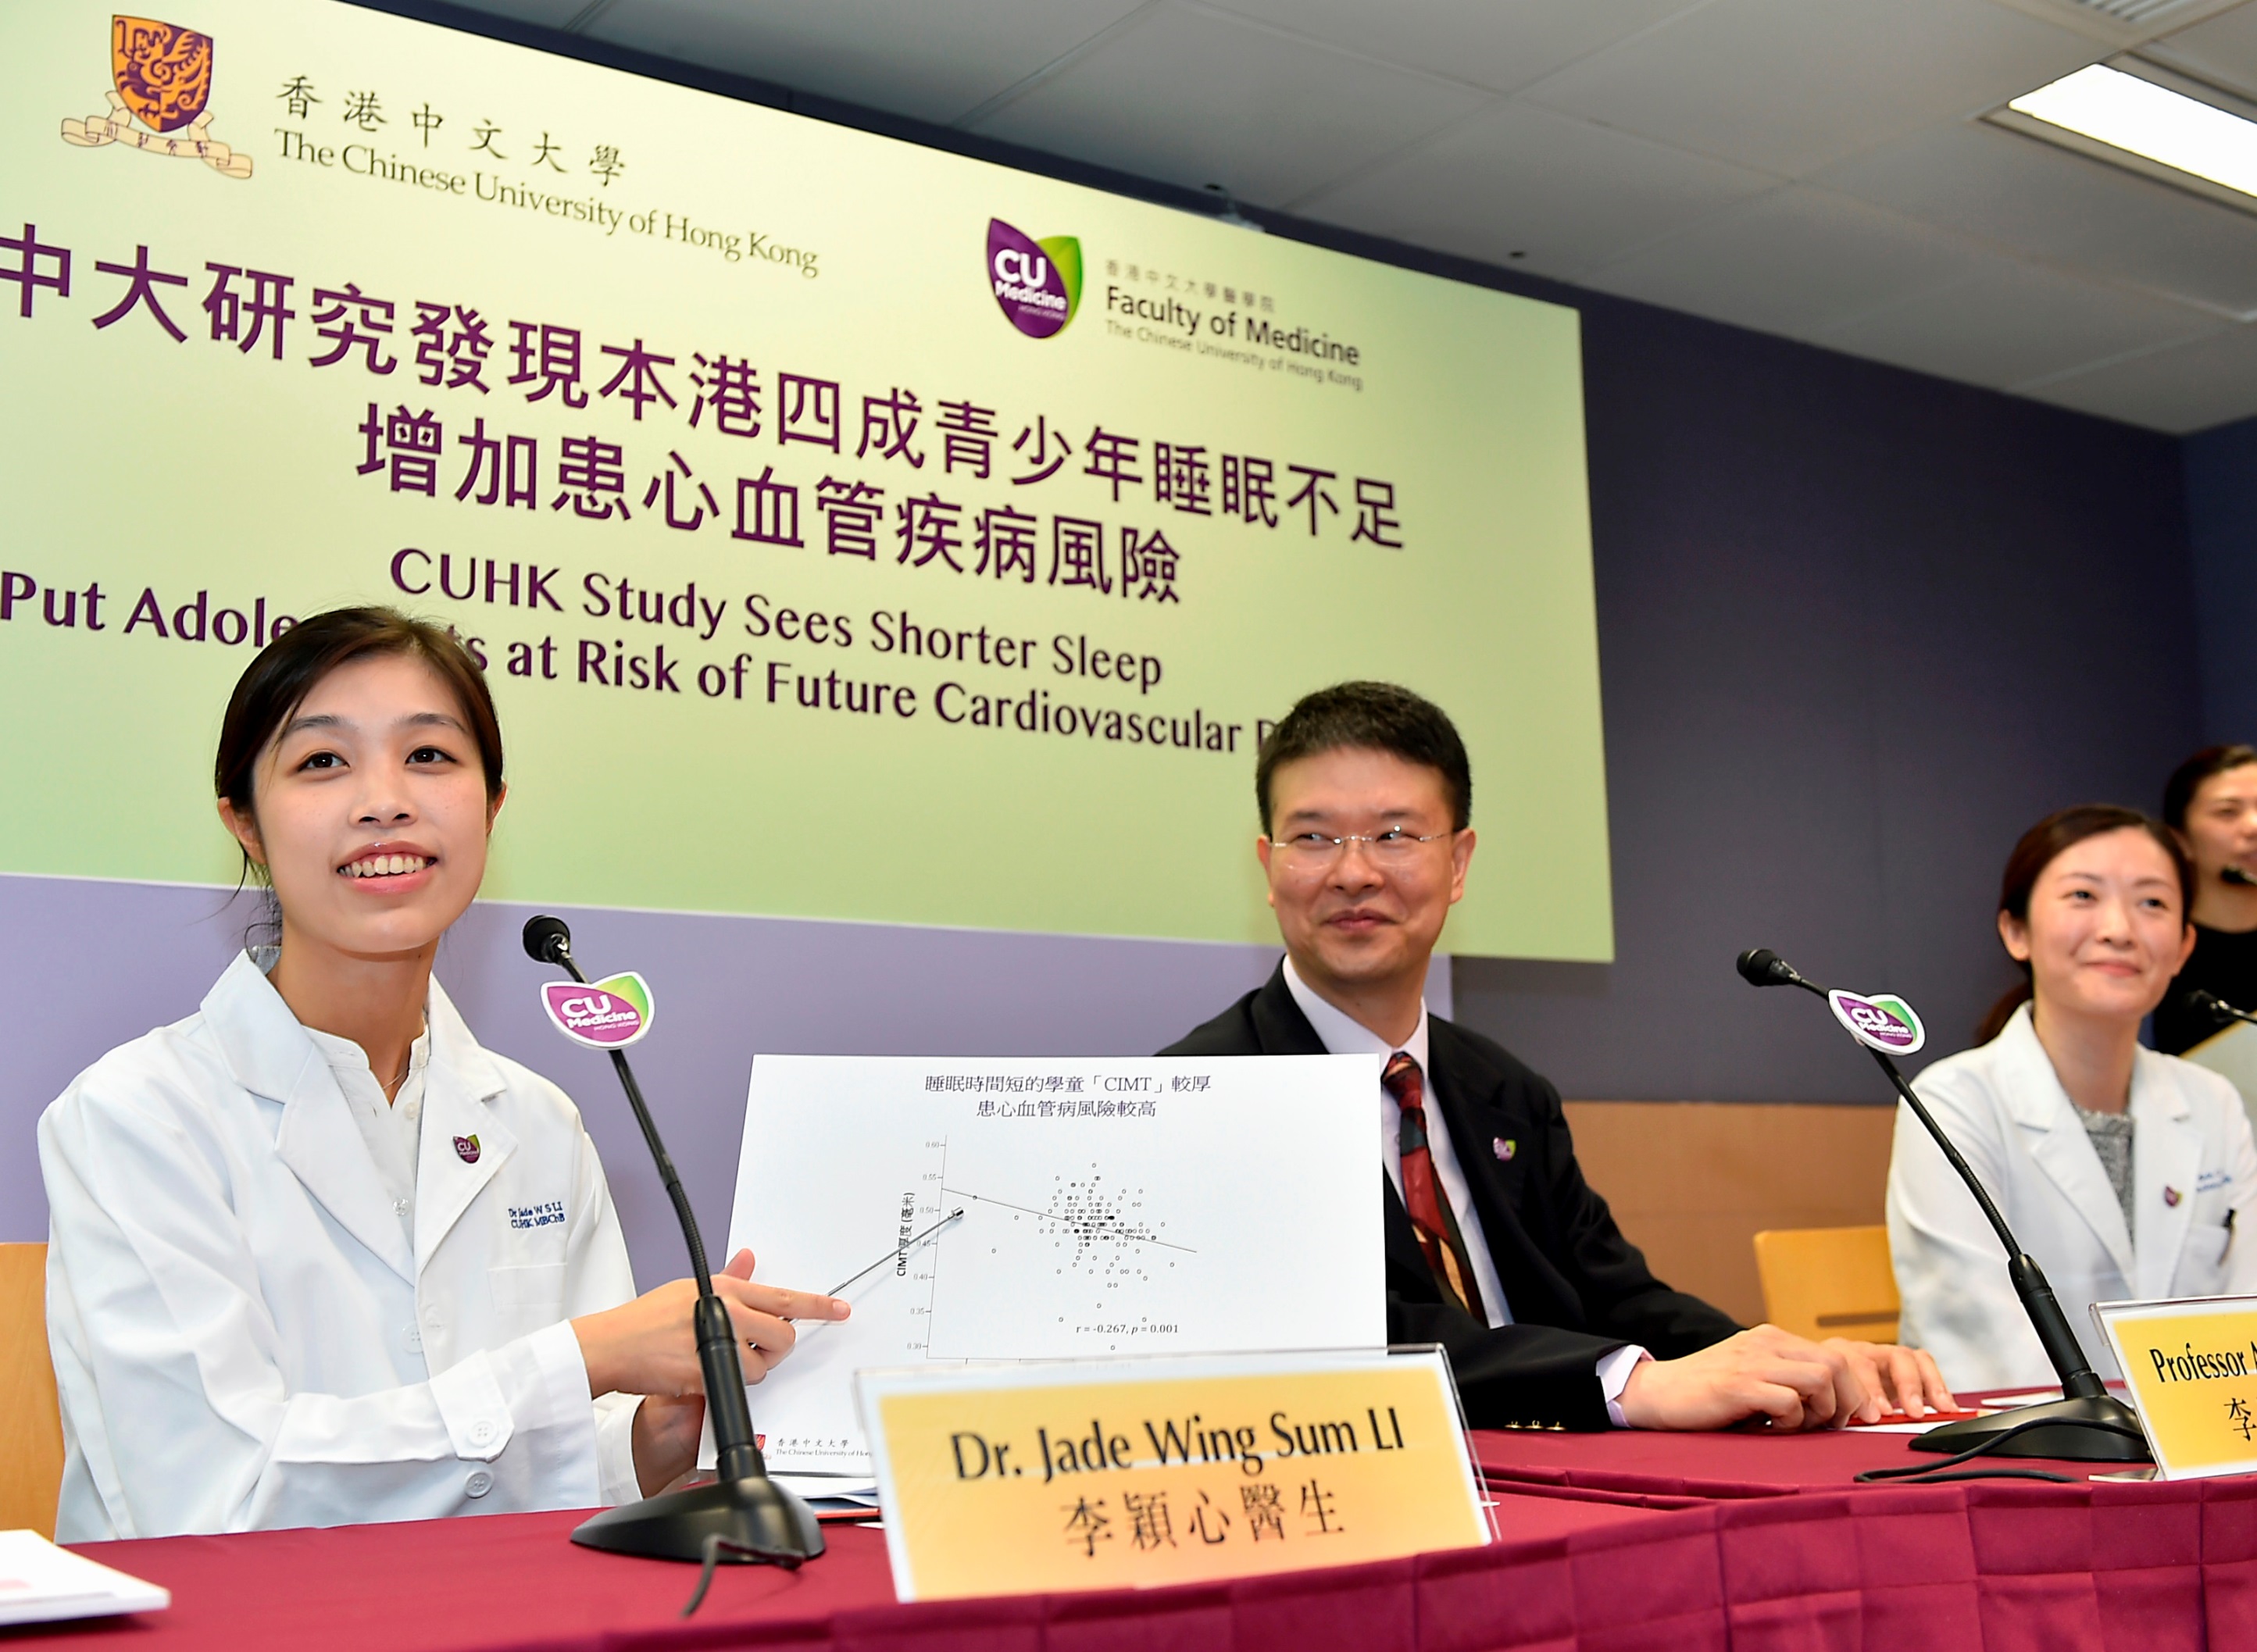 Dr. Jade LI (left) says that shorter sleep duration is associated with increased Carotid Intima-Media Thickness (CIMT) in adolescents, which implies higher risk of cardiovascular diseases in the future.